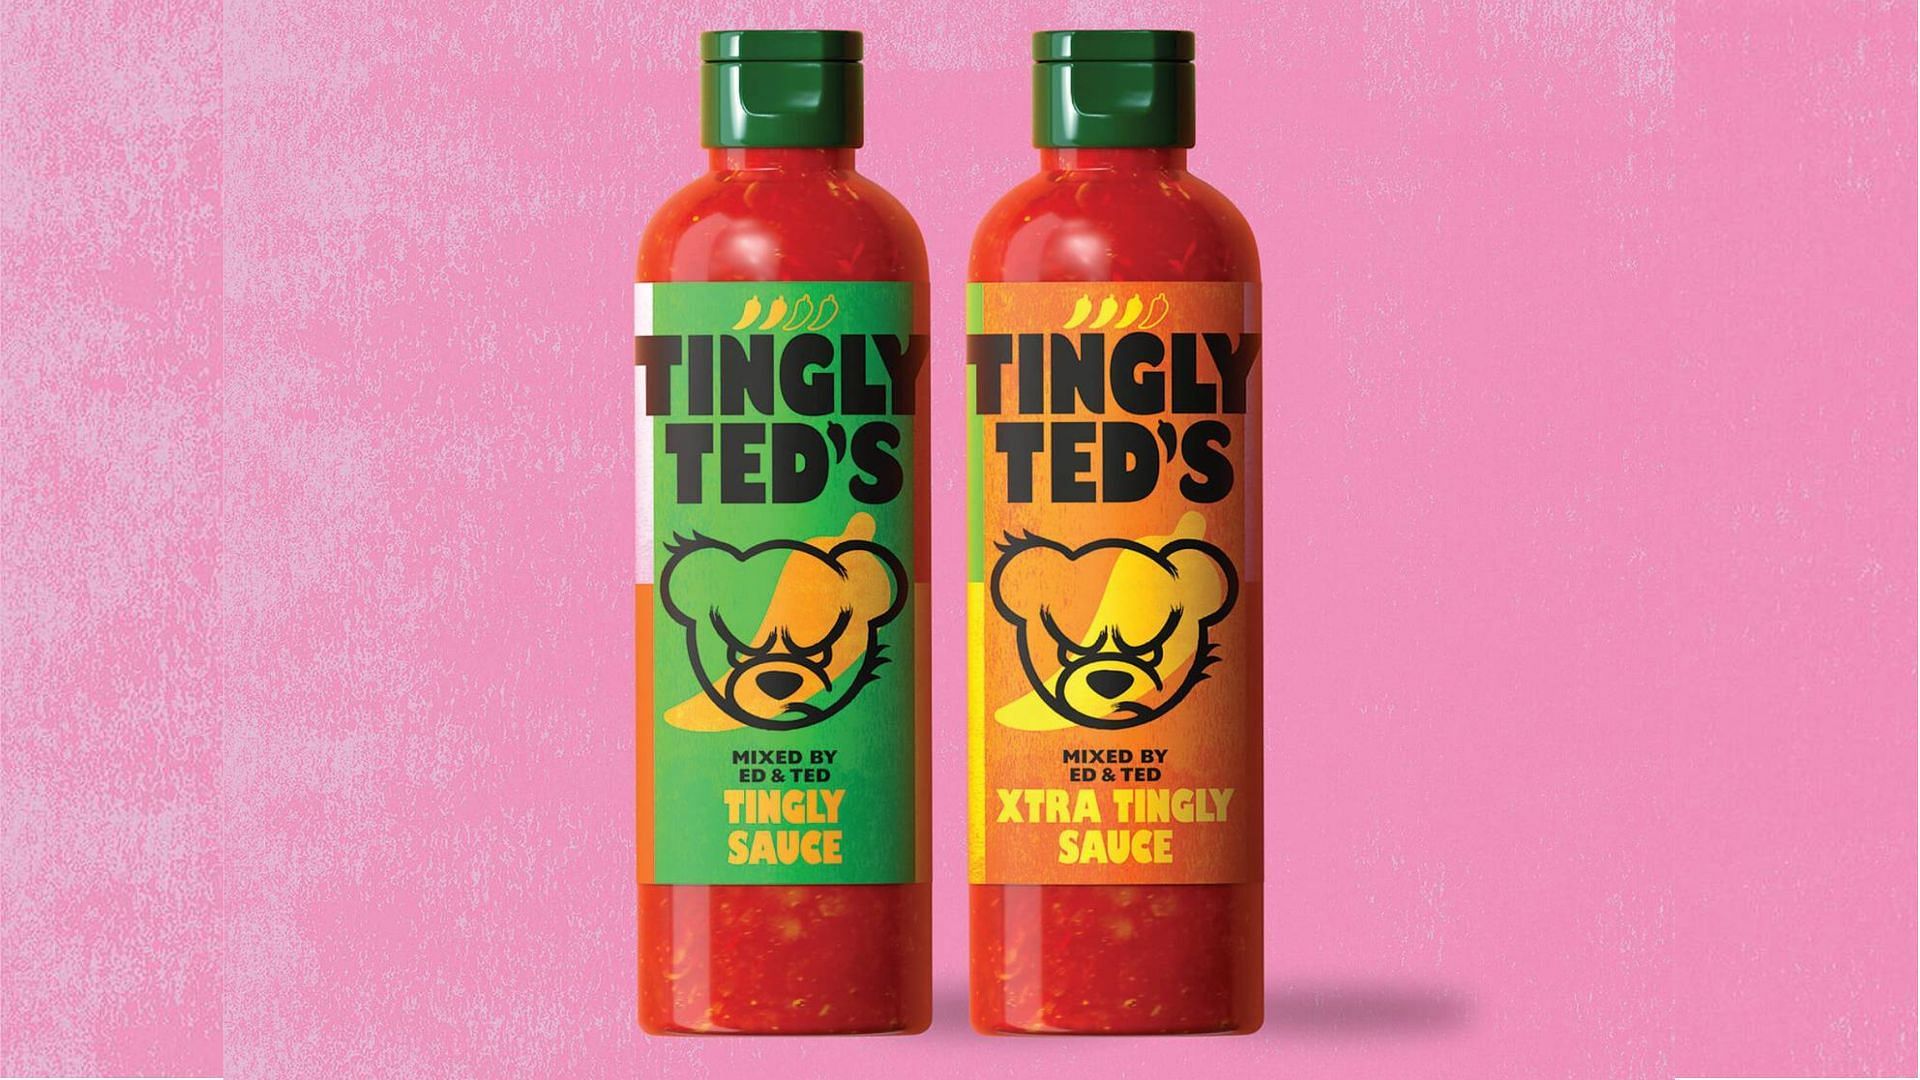 The Tingly and Xtra Tingly sauce by Ed Sheeran (Image via Tingly Teds)